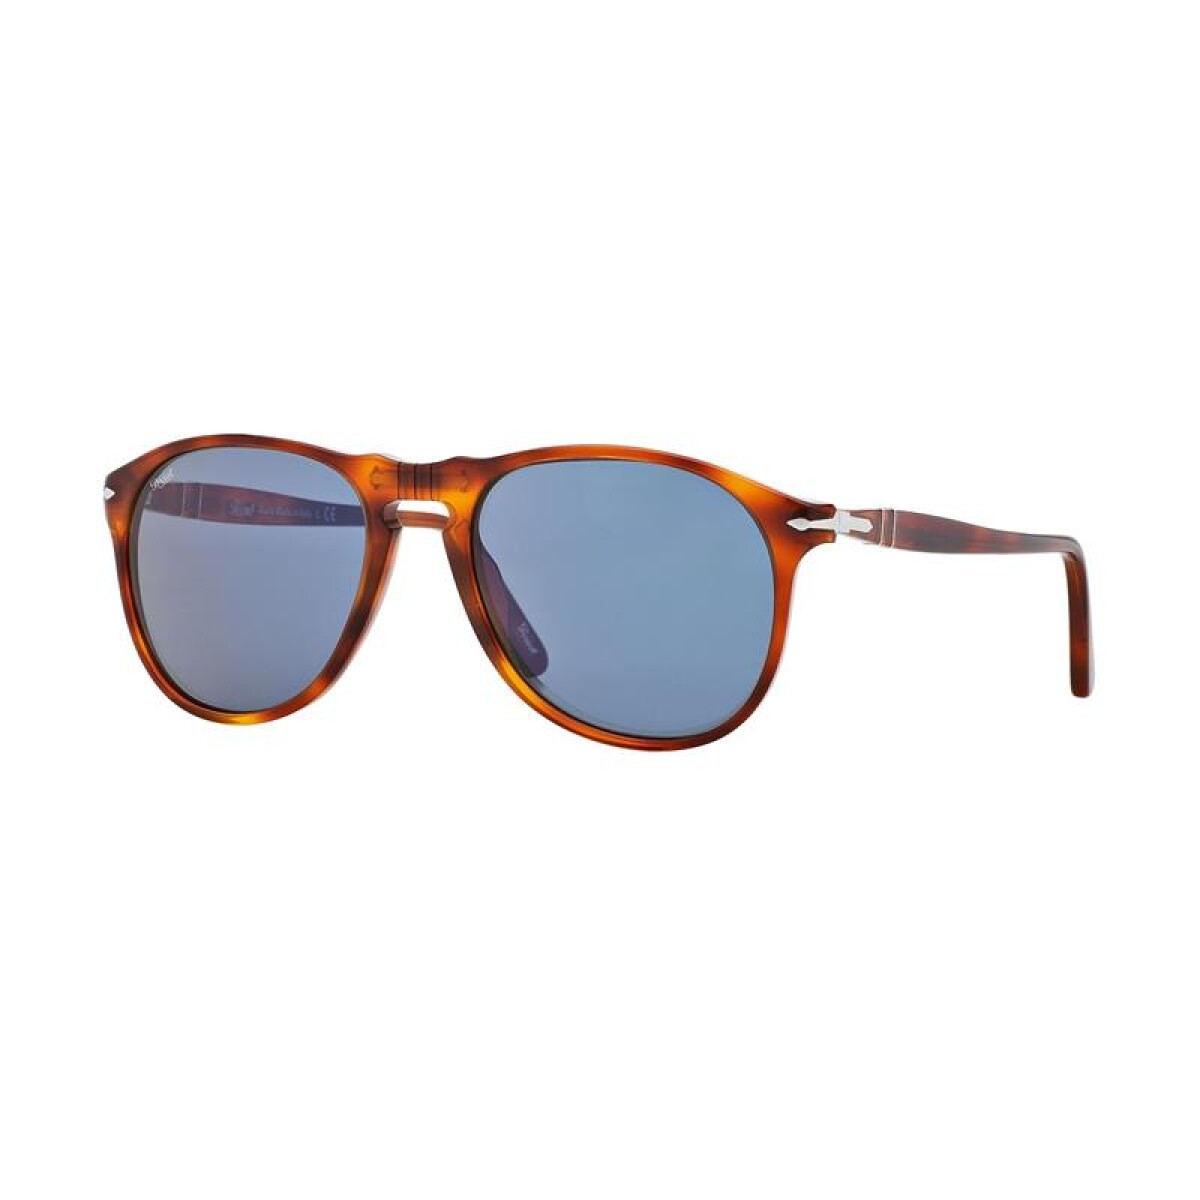 Persol 9649-s - 96/56 